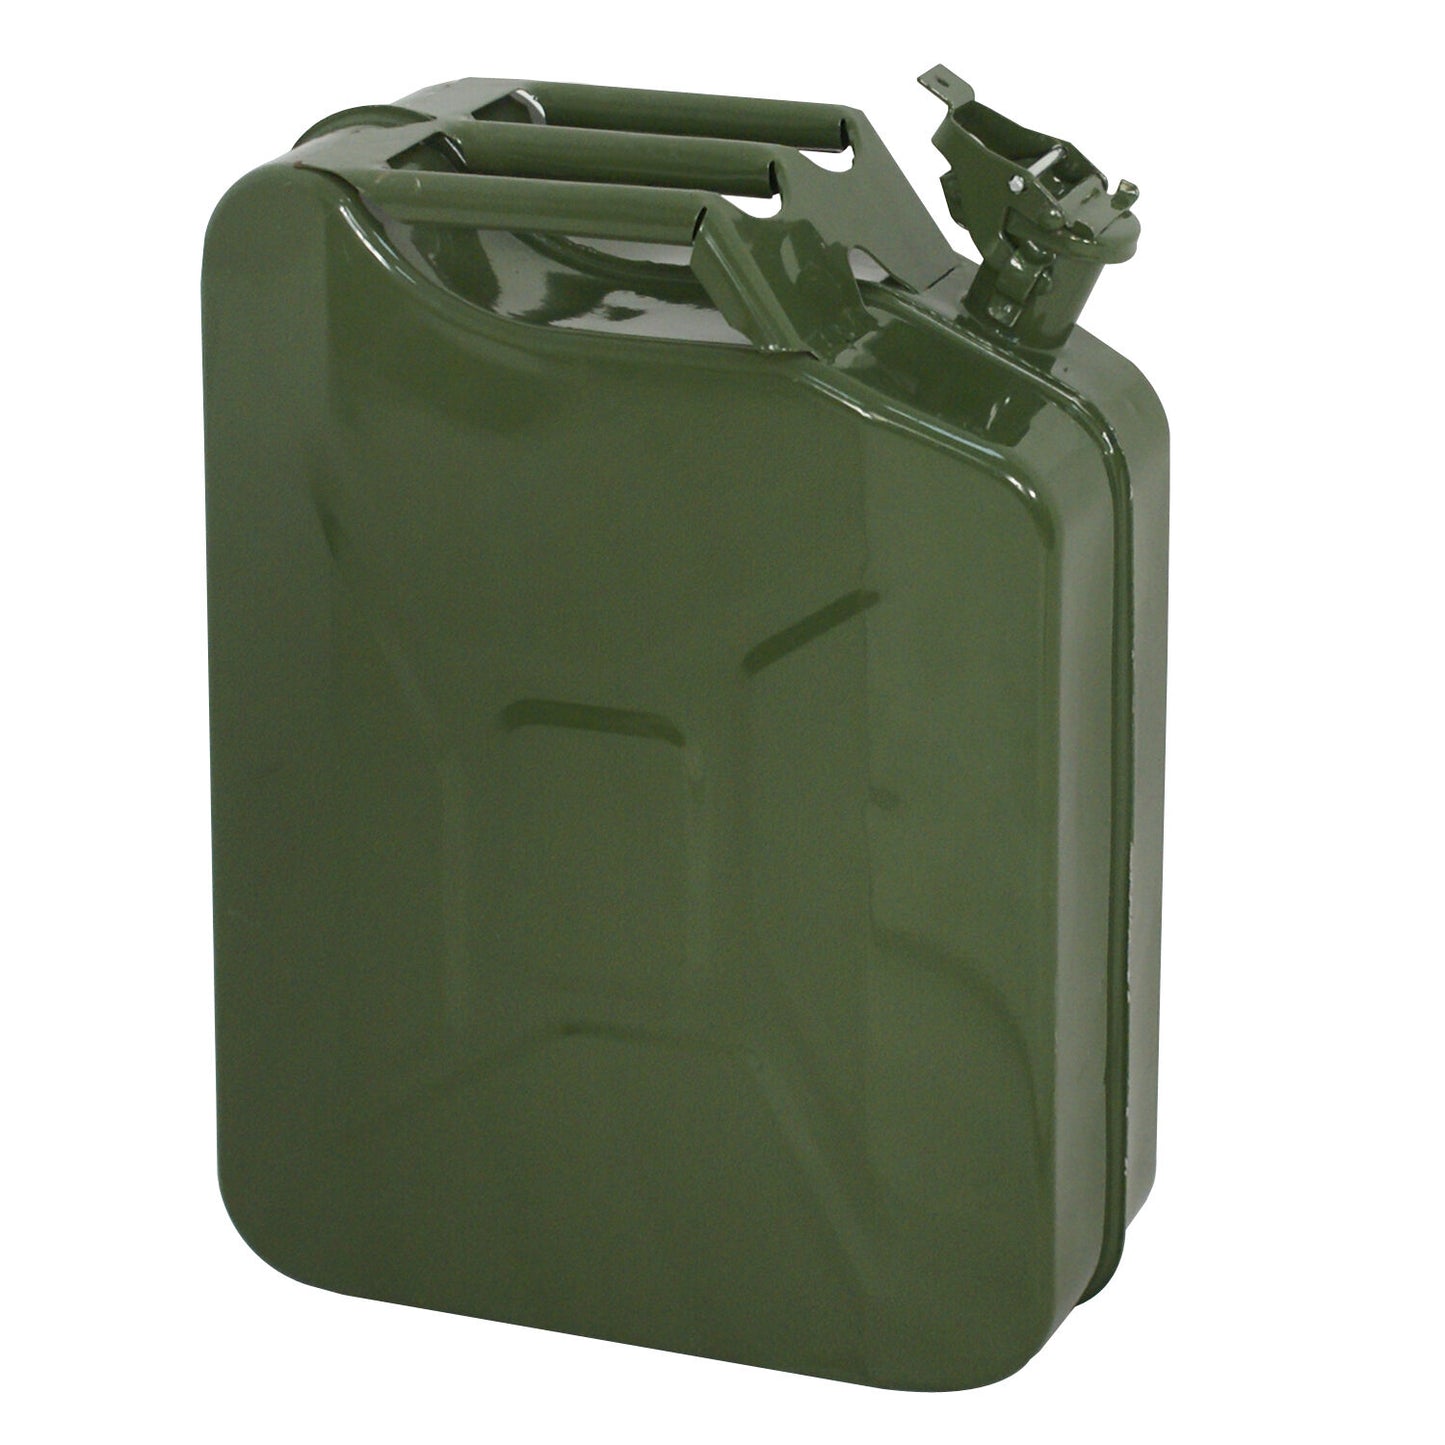 8pcs 5 Gal 20L Jerry Can Gasoline Can Emergency Backup Caddy Tank